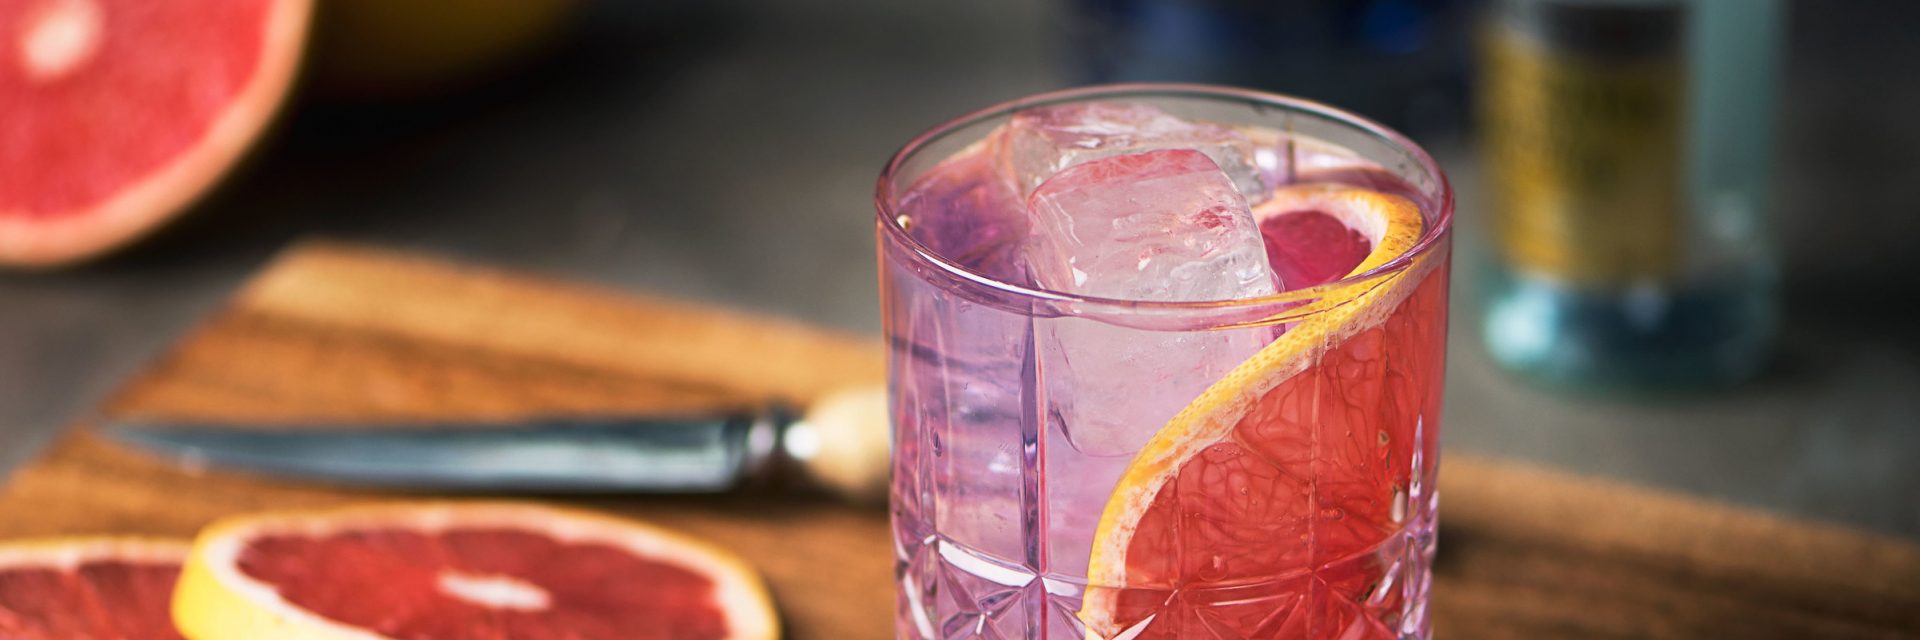 Purple gin and tonic with grapefruit